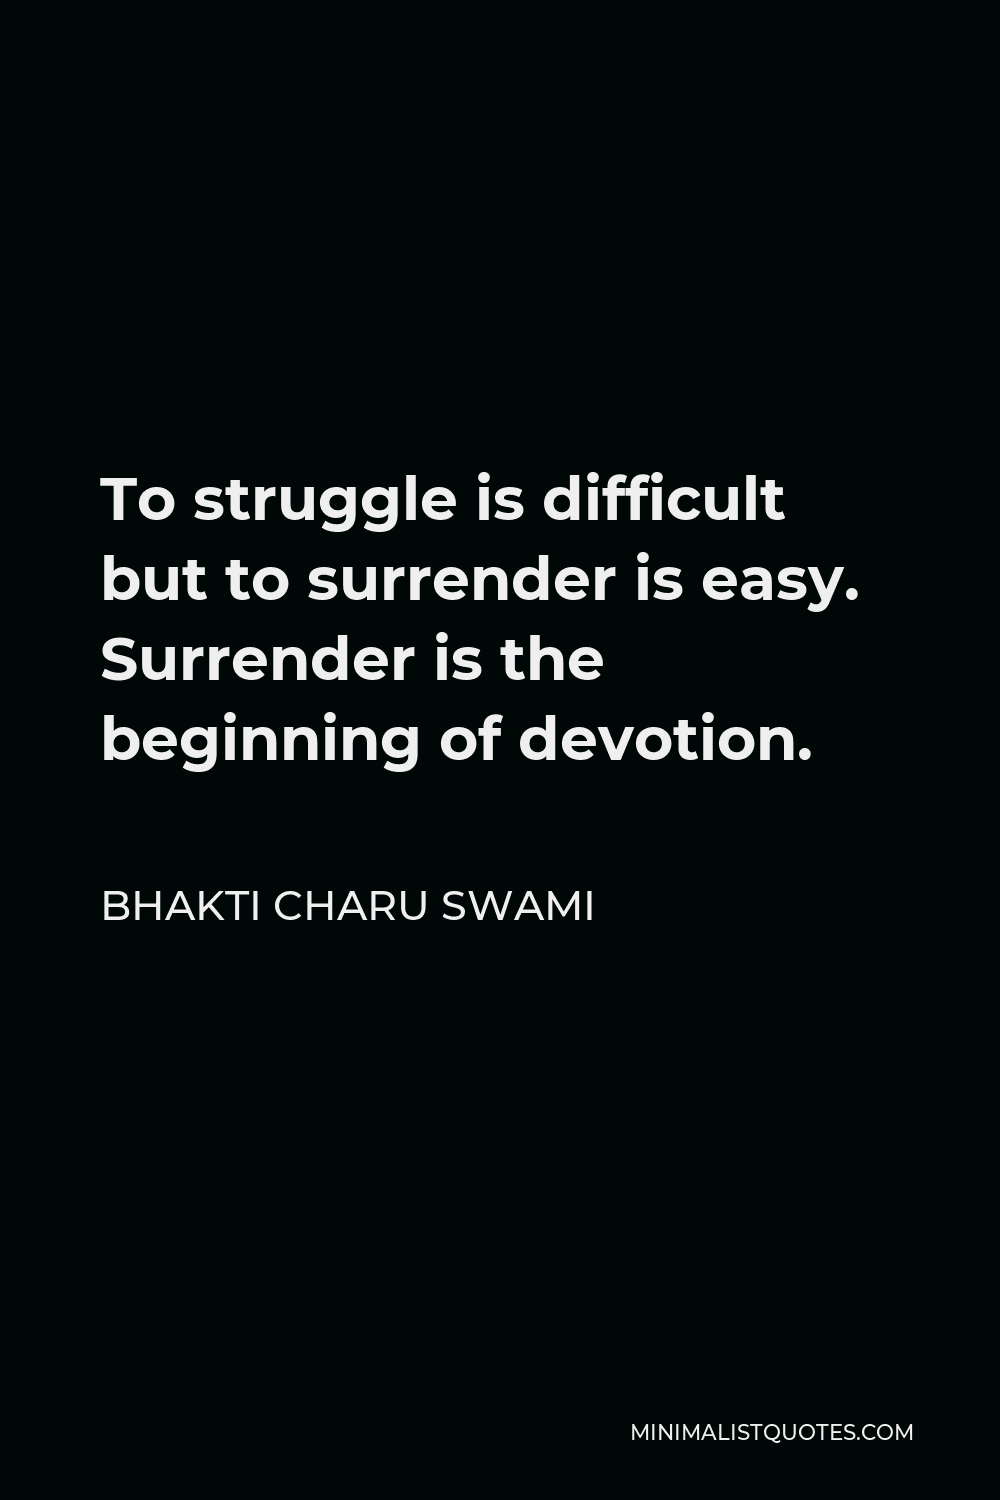 Bhakti Charu Swami Quote - To struggle is difficult but to surrender is easy. Surrender is the beginning of devotion.